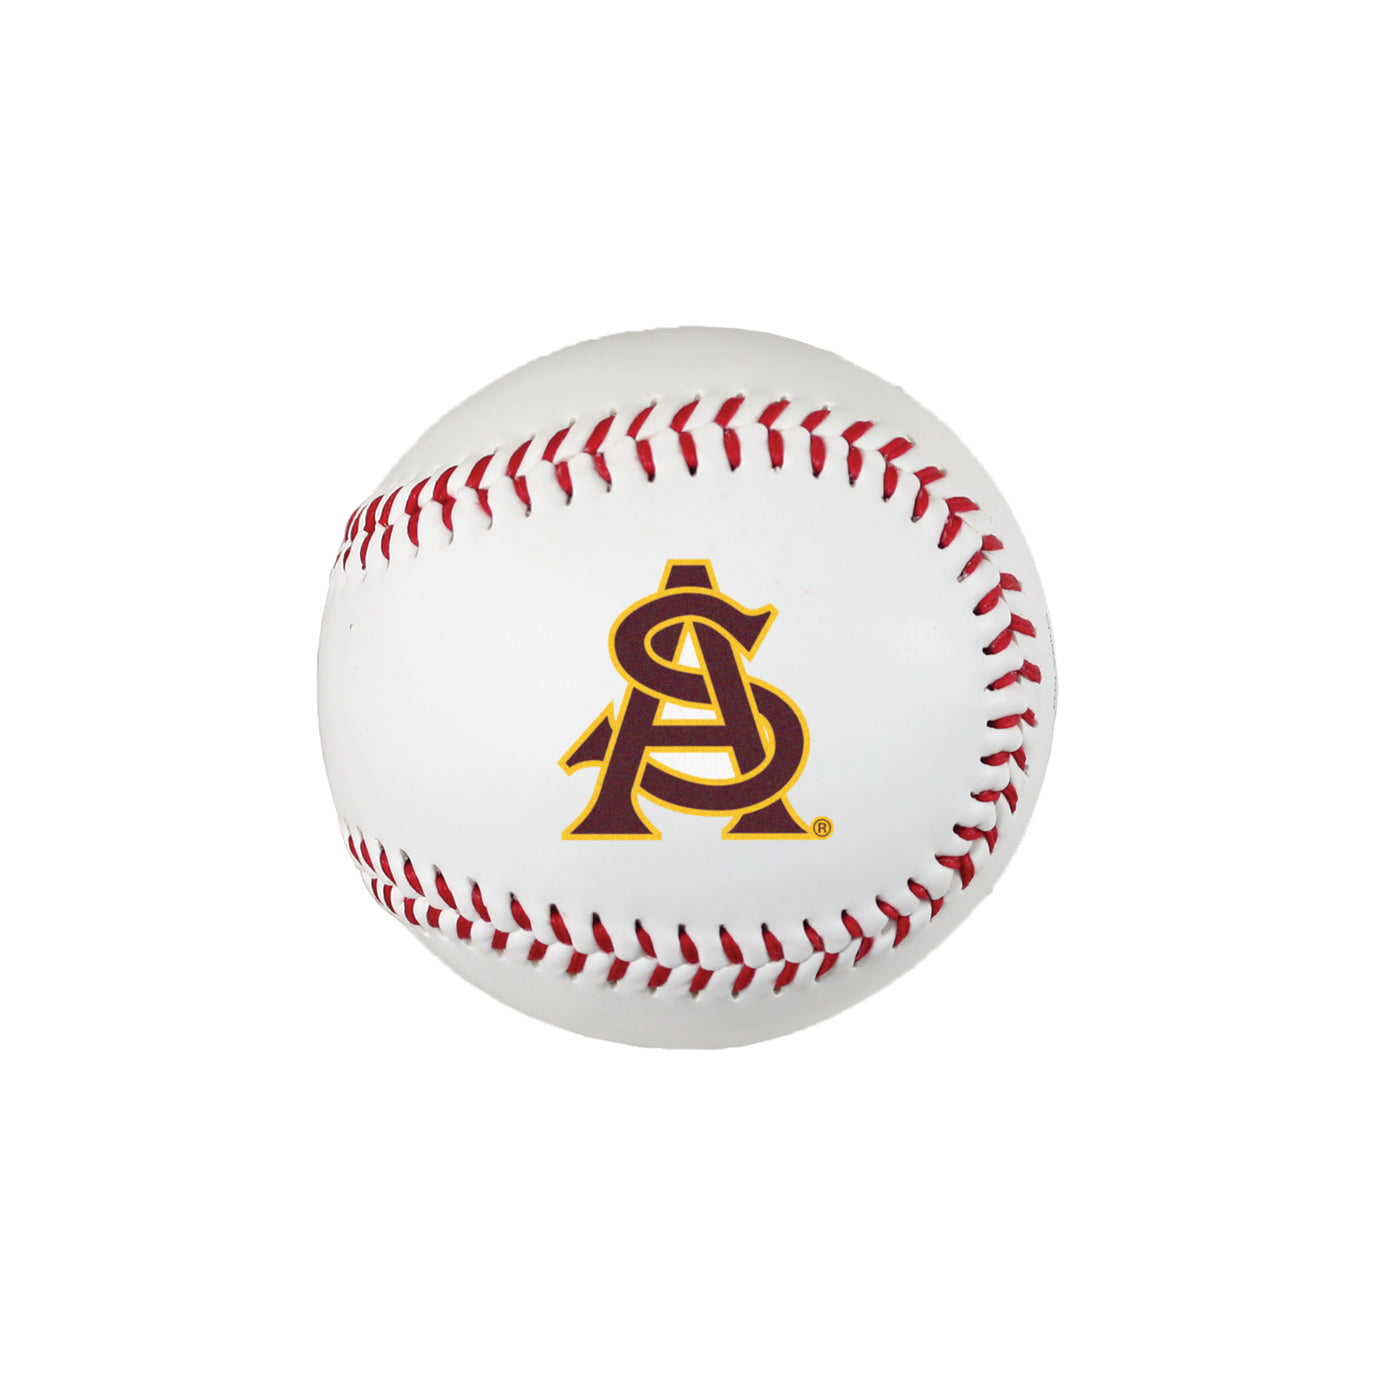 ASU baseball with maroon double stitching and an interlocking 'A' and 'S'